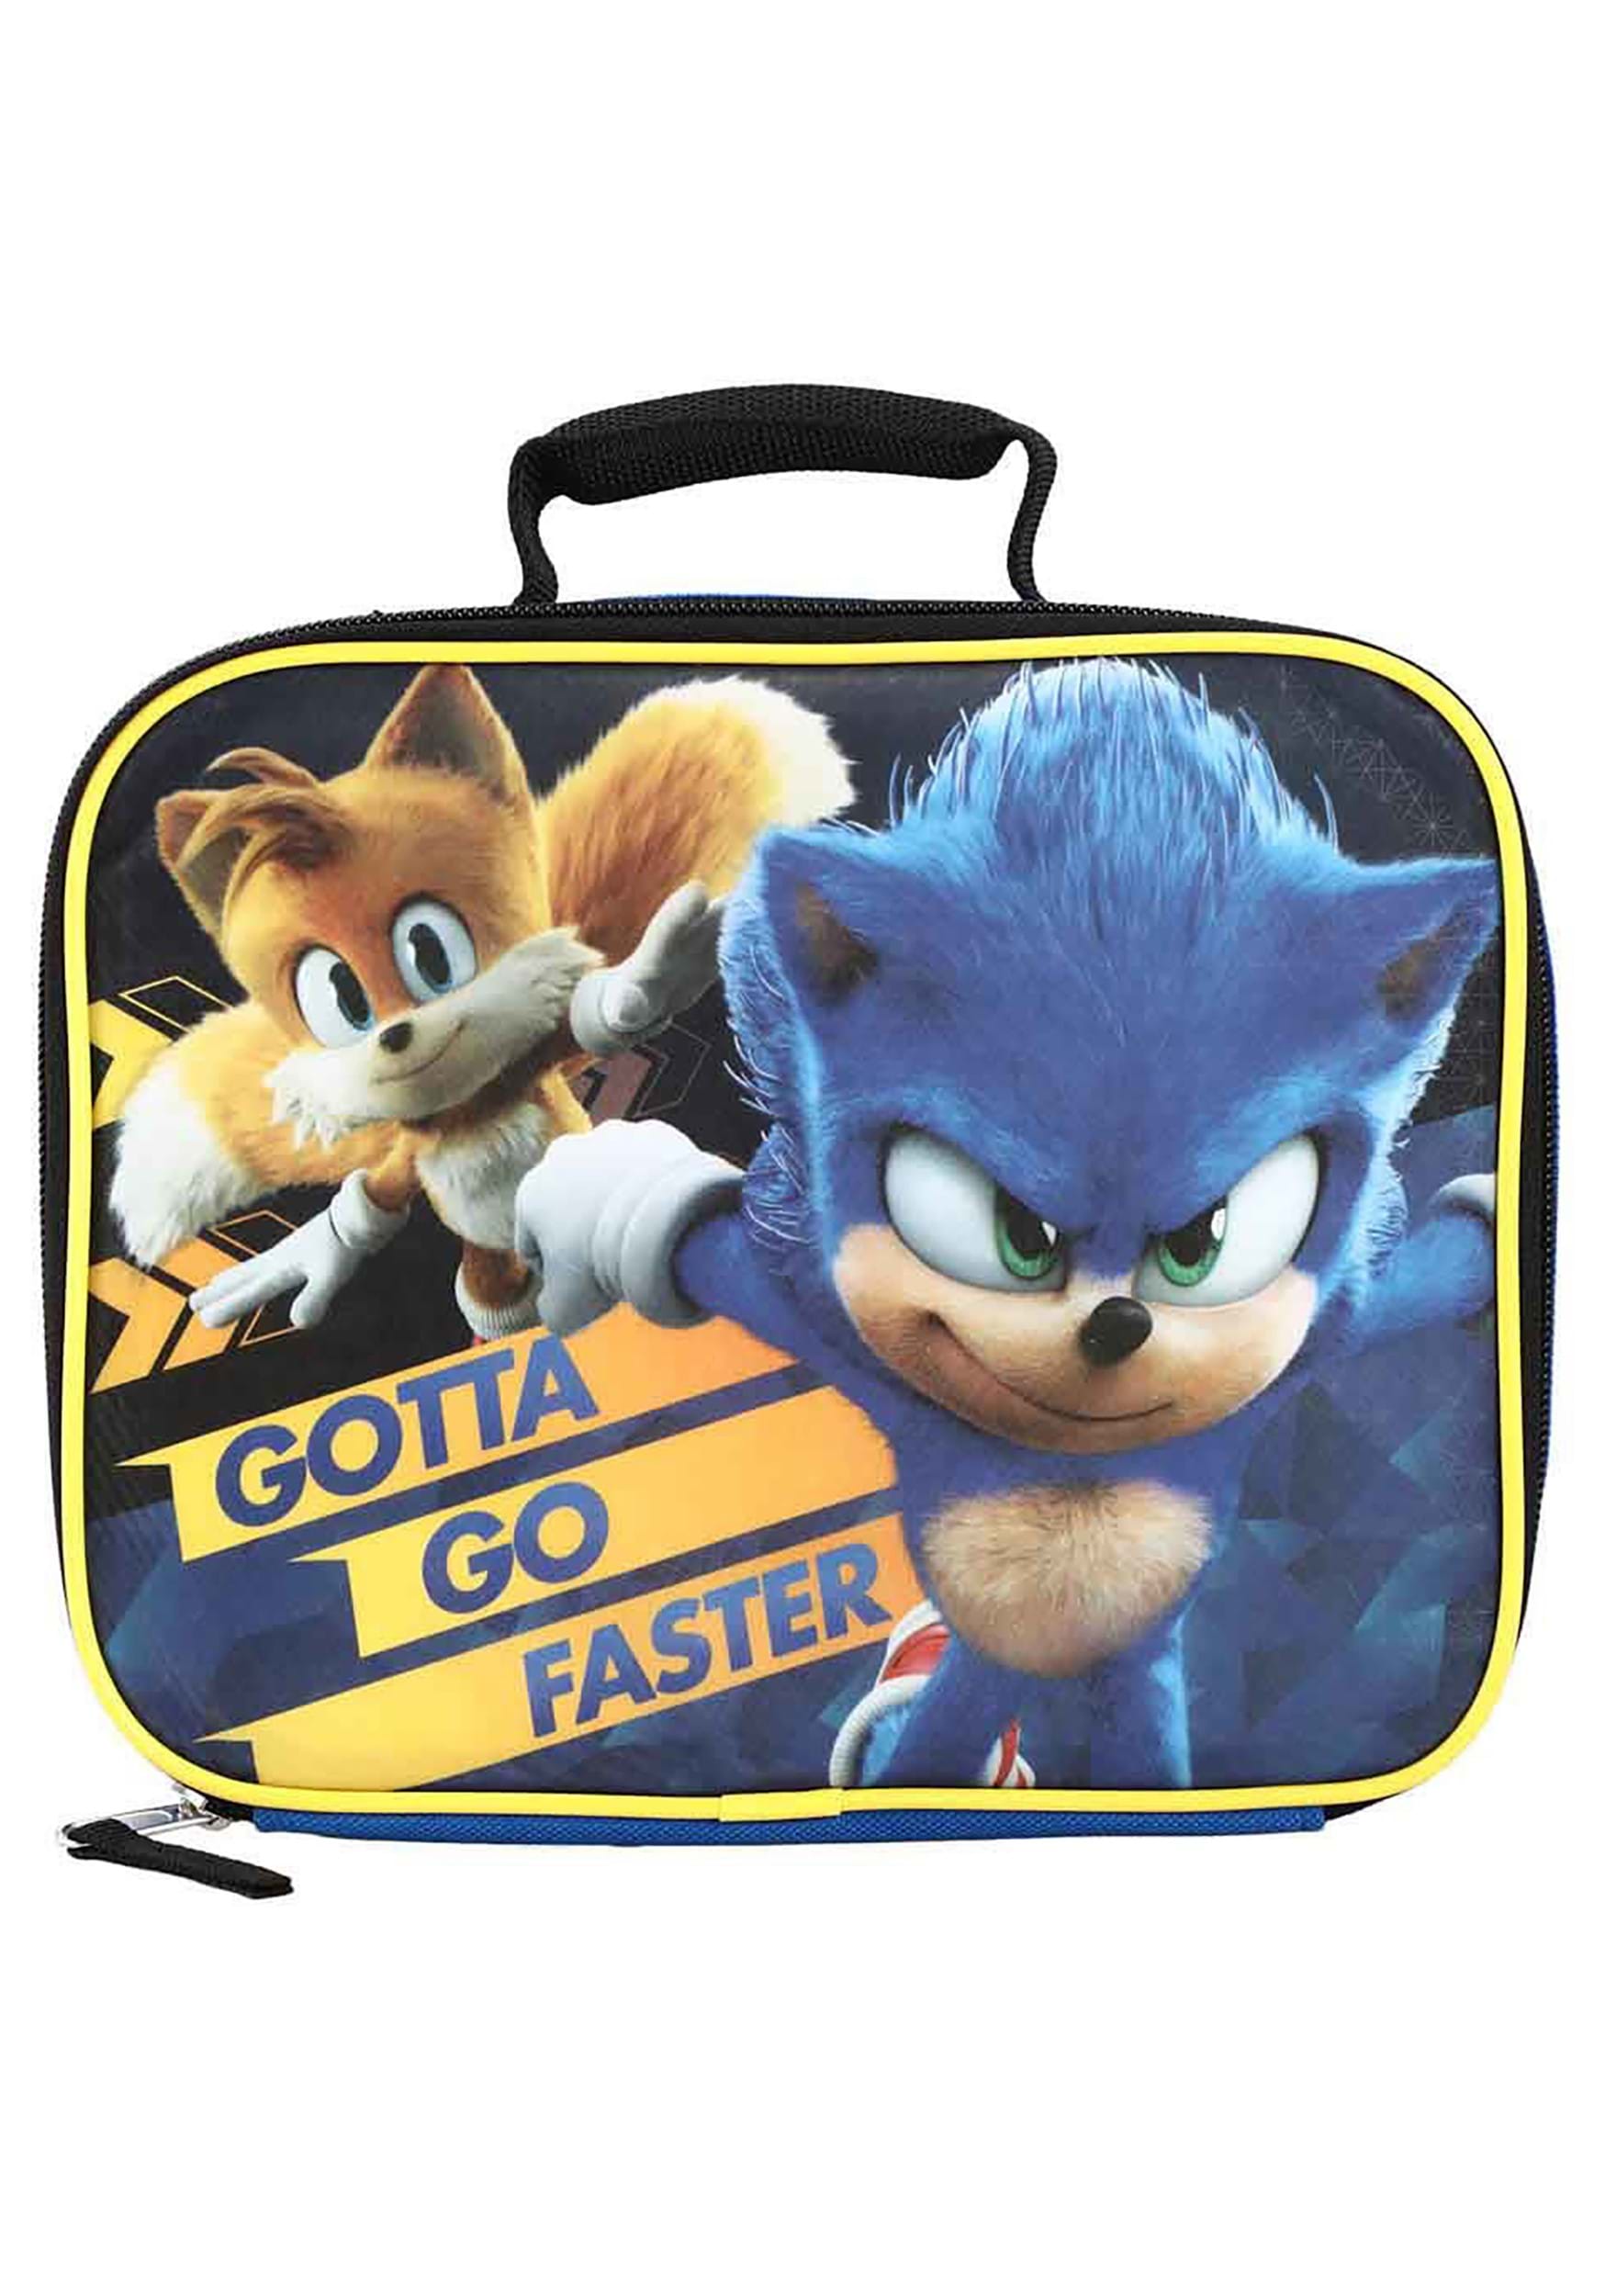 Sonic TheHedgehog Lunch Box, Insulated Lunch Bag for School, Sonic Gifts